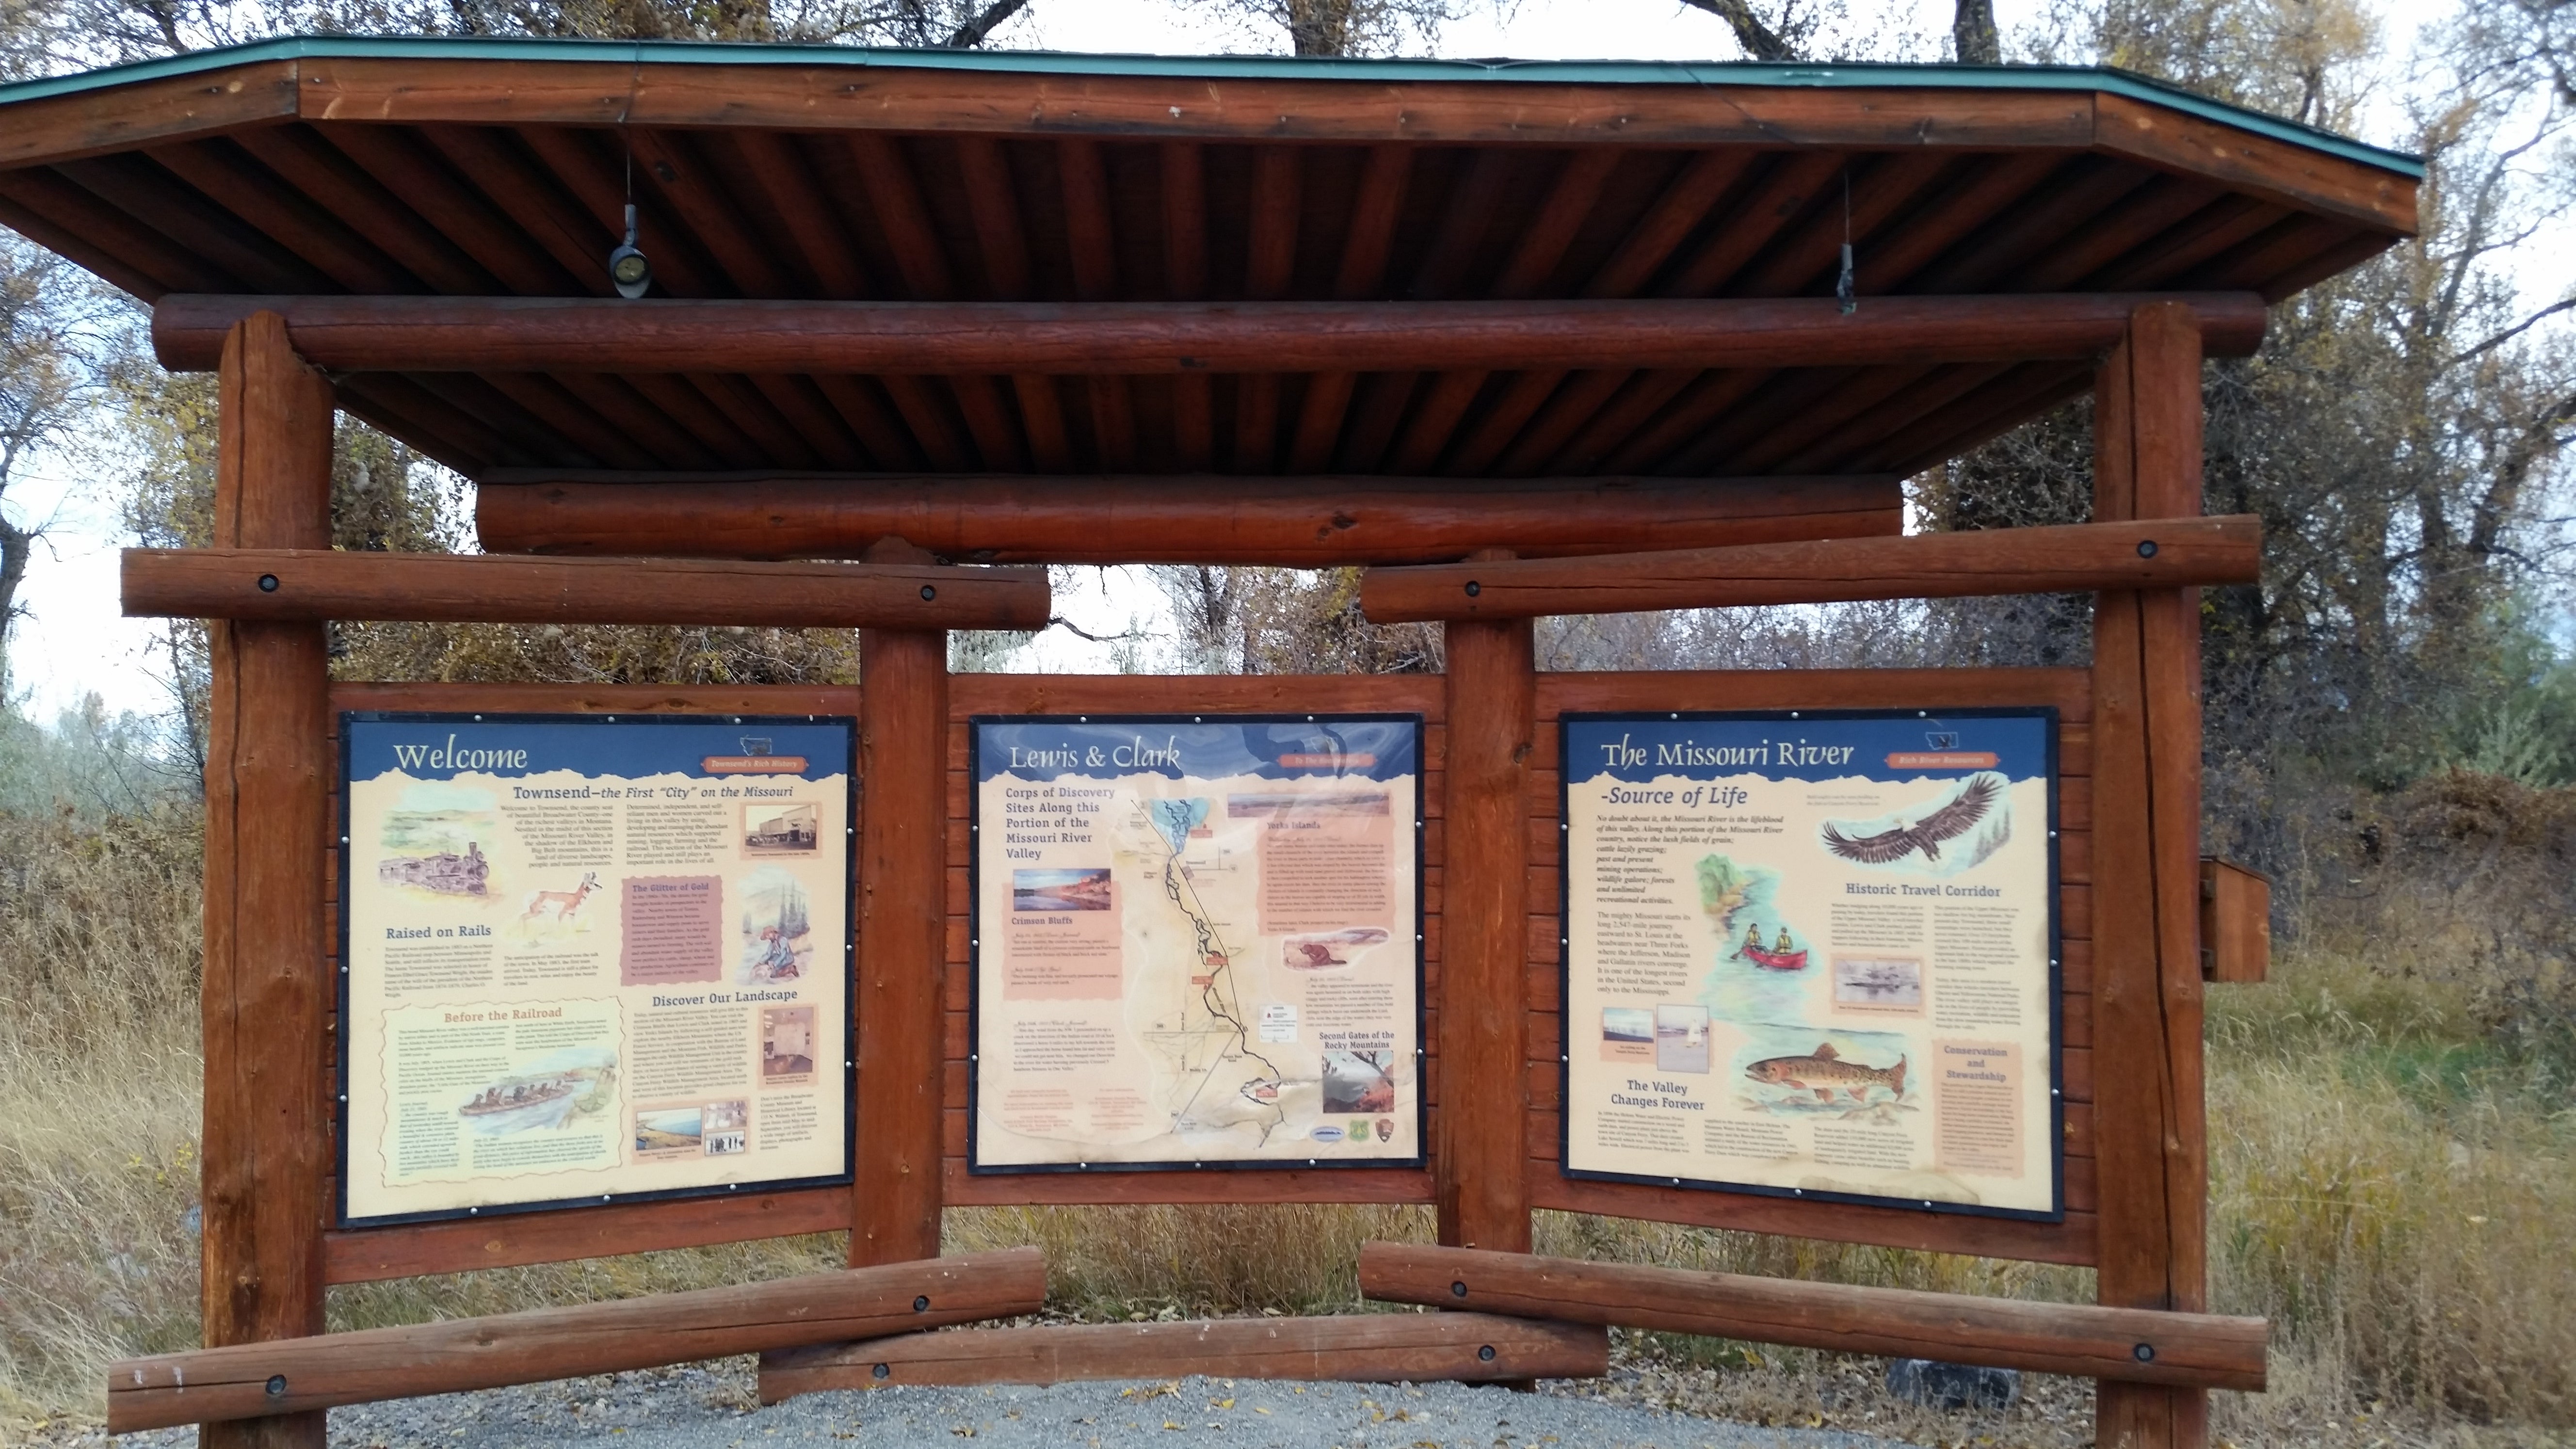 Lewis and Clark and area information.